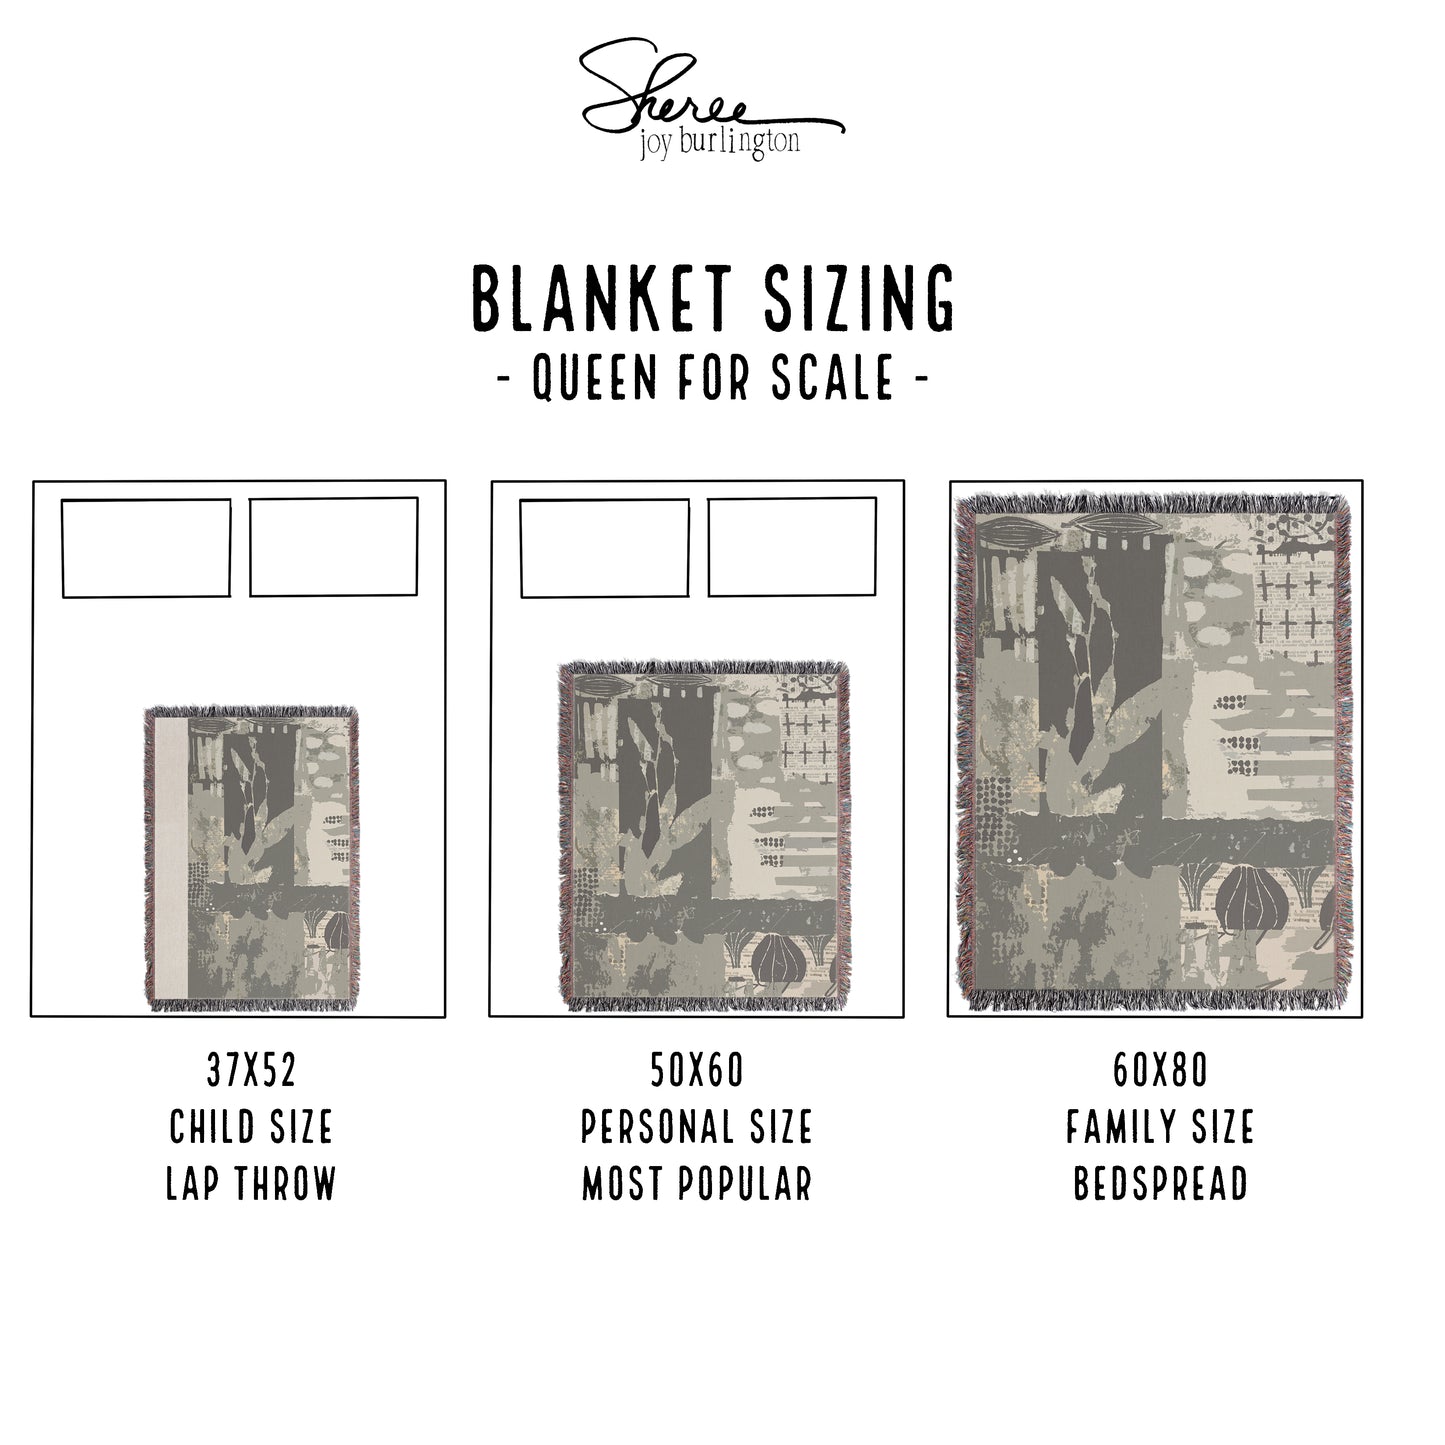 Personalized Woven Blanket Size Chart | Sage & Olive Abstract Art design by Sheree Burlington